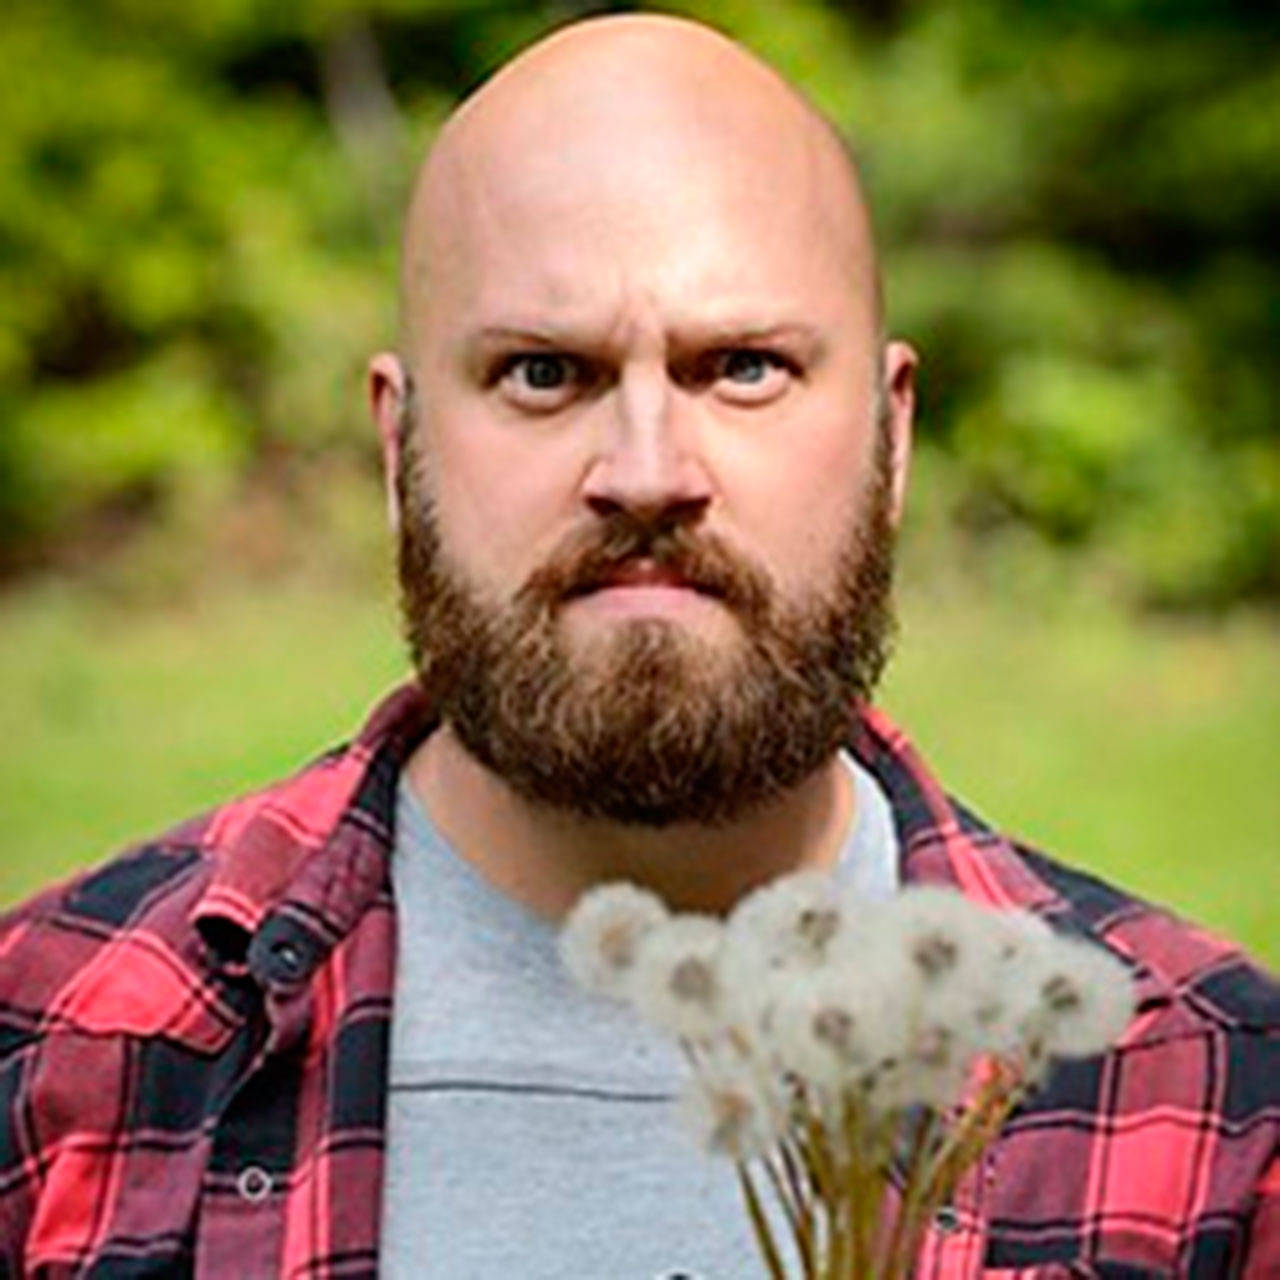 Photo courtesy of the Seattle International Comedy Competition | Luke Severeid, one of the comedic contestants in the 38th annual Seattle International Comedy Competition, coming to Bainbridge Performing Arts at 7:30 p.m. Saturday, Nov. 18.